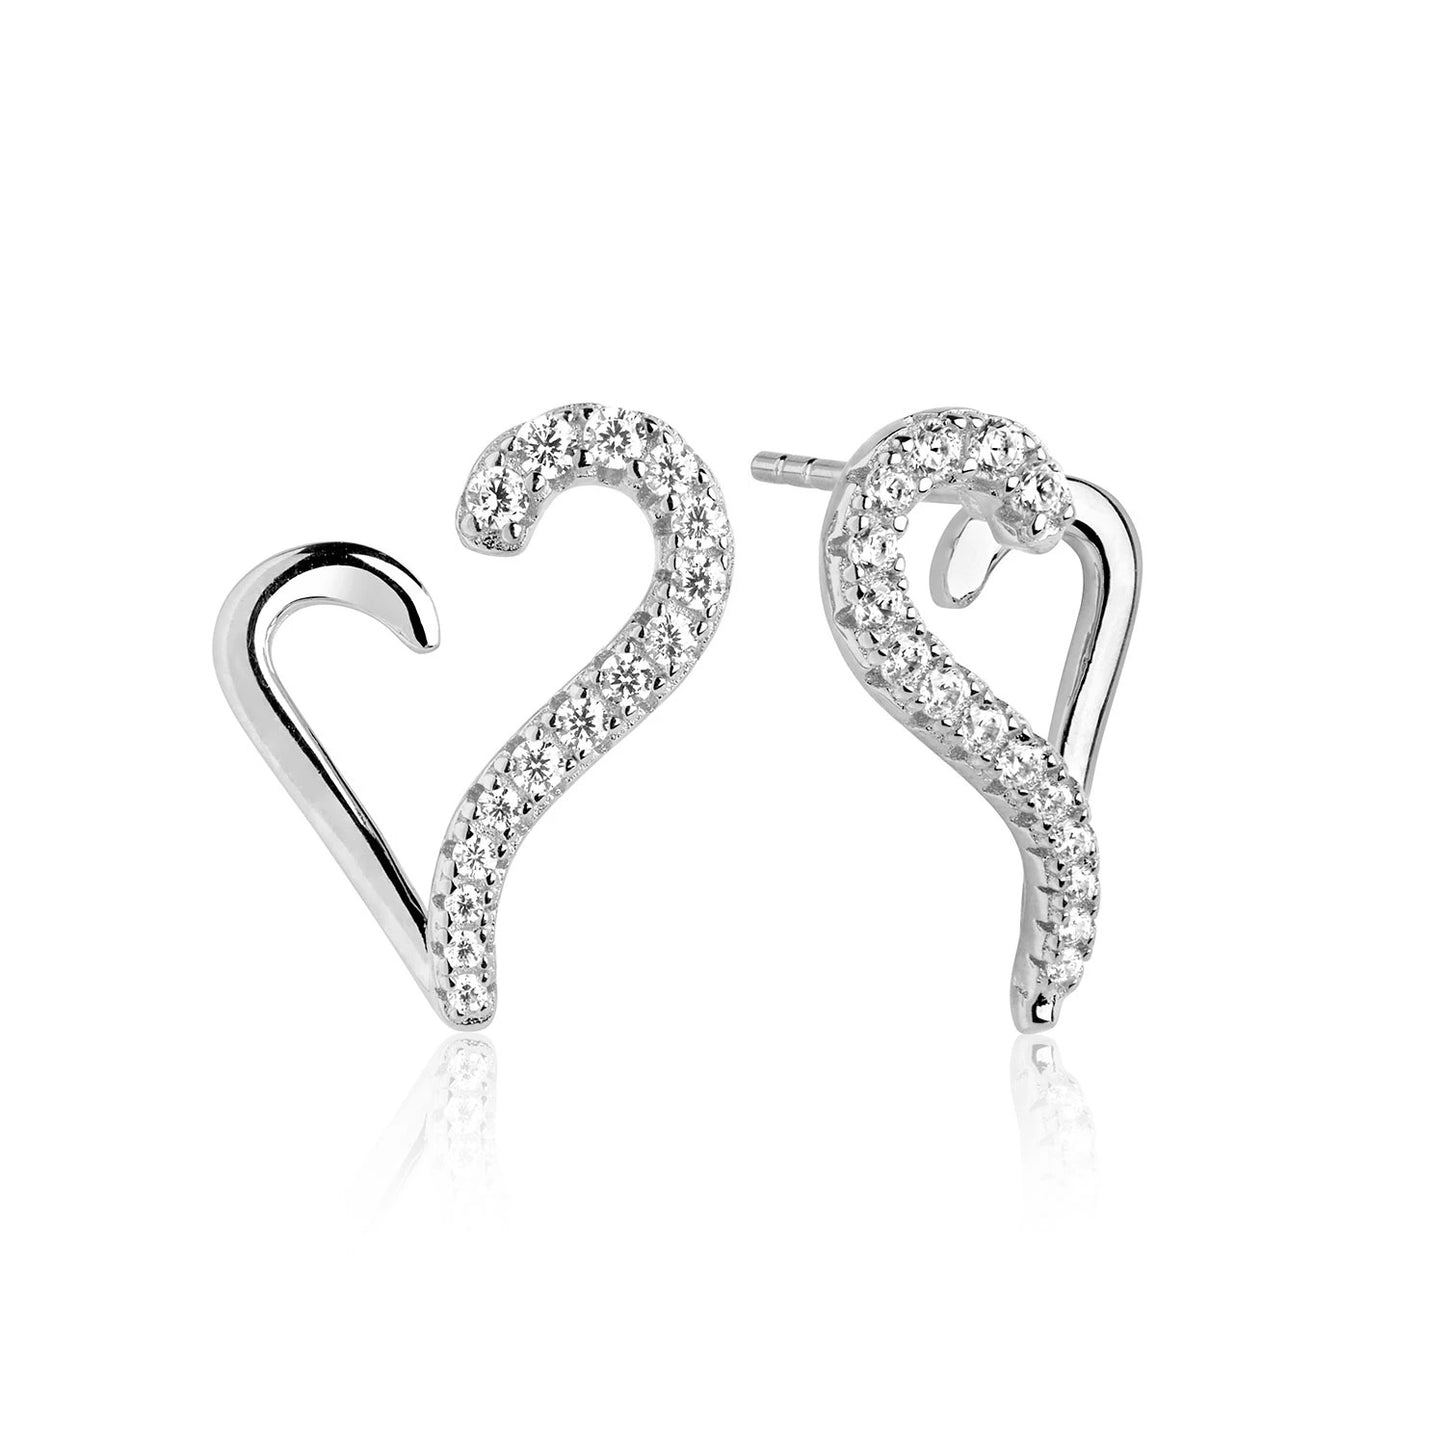 Valentine Earrings - Sterling Silver with White Zirconia Irregular Hearts